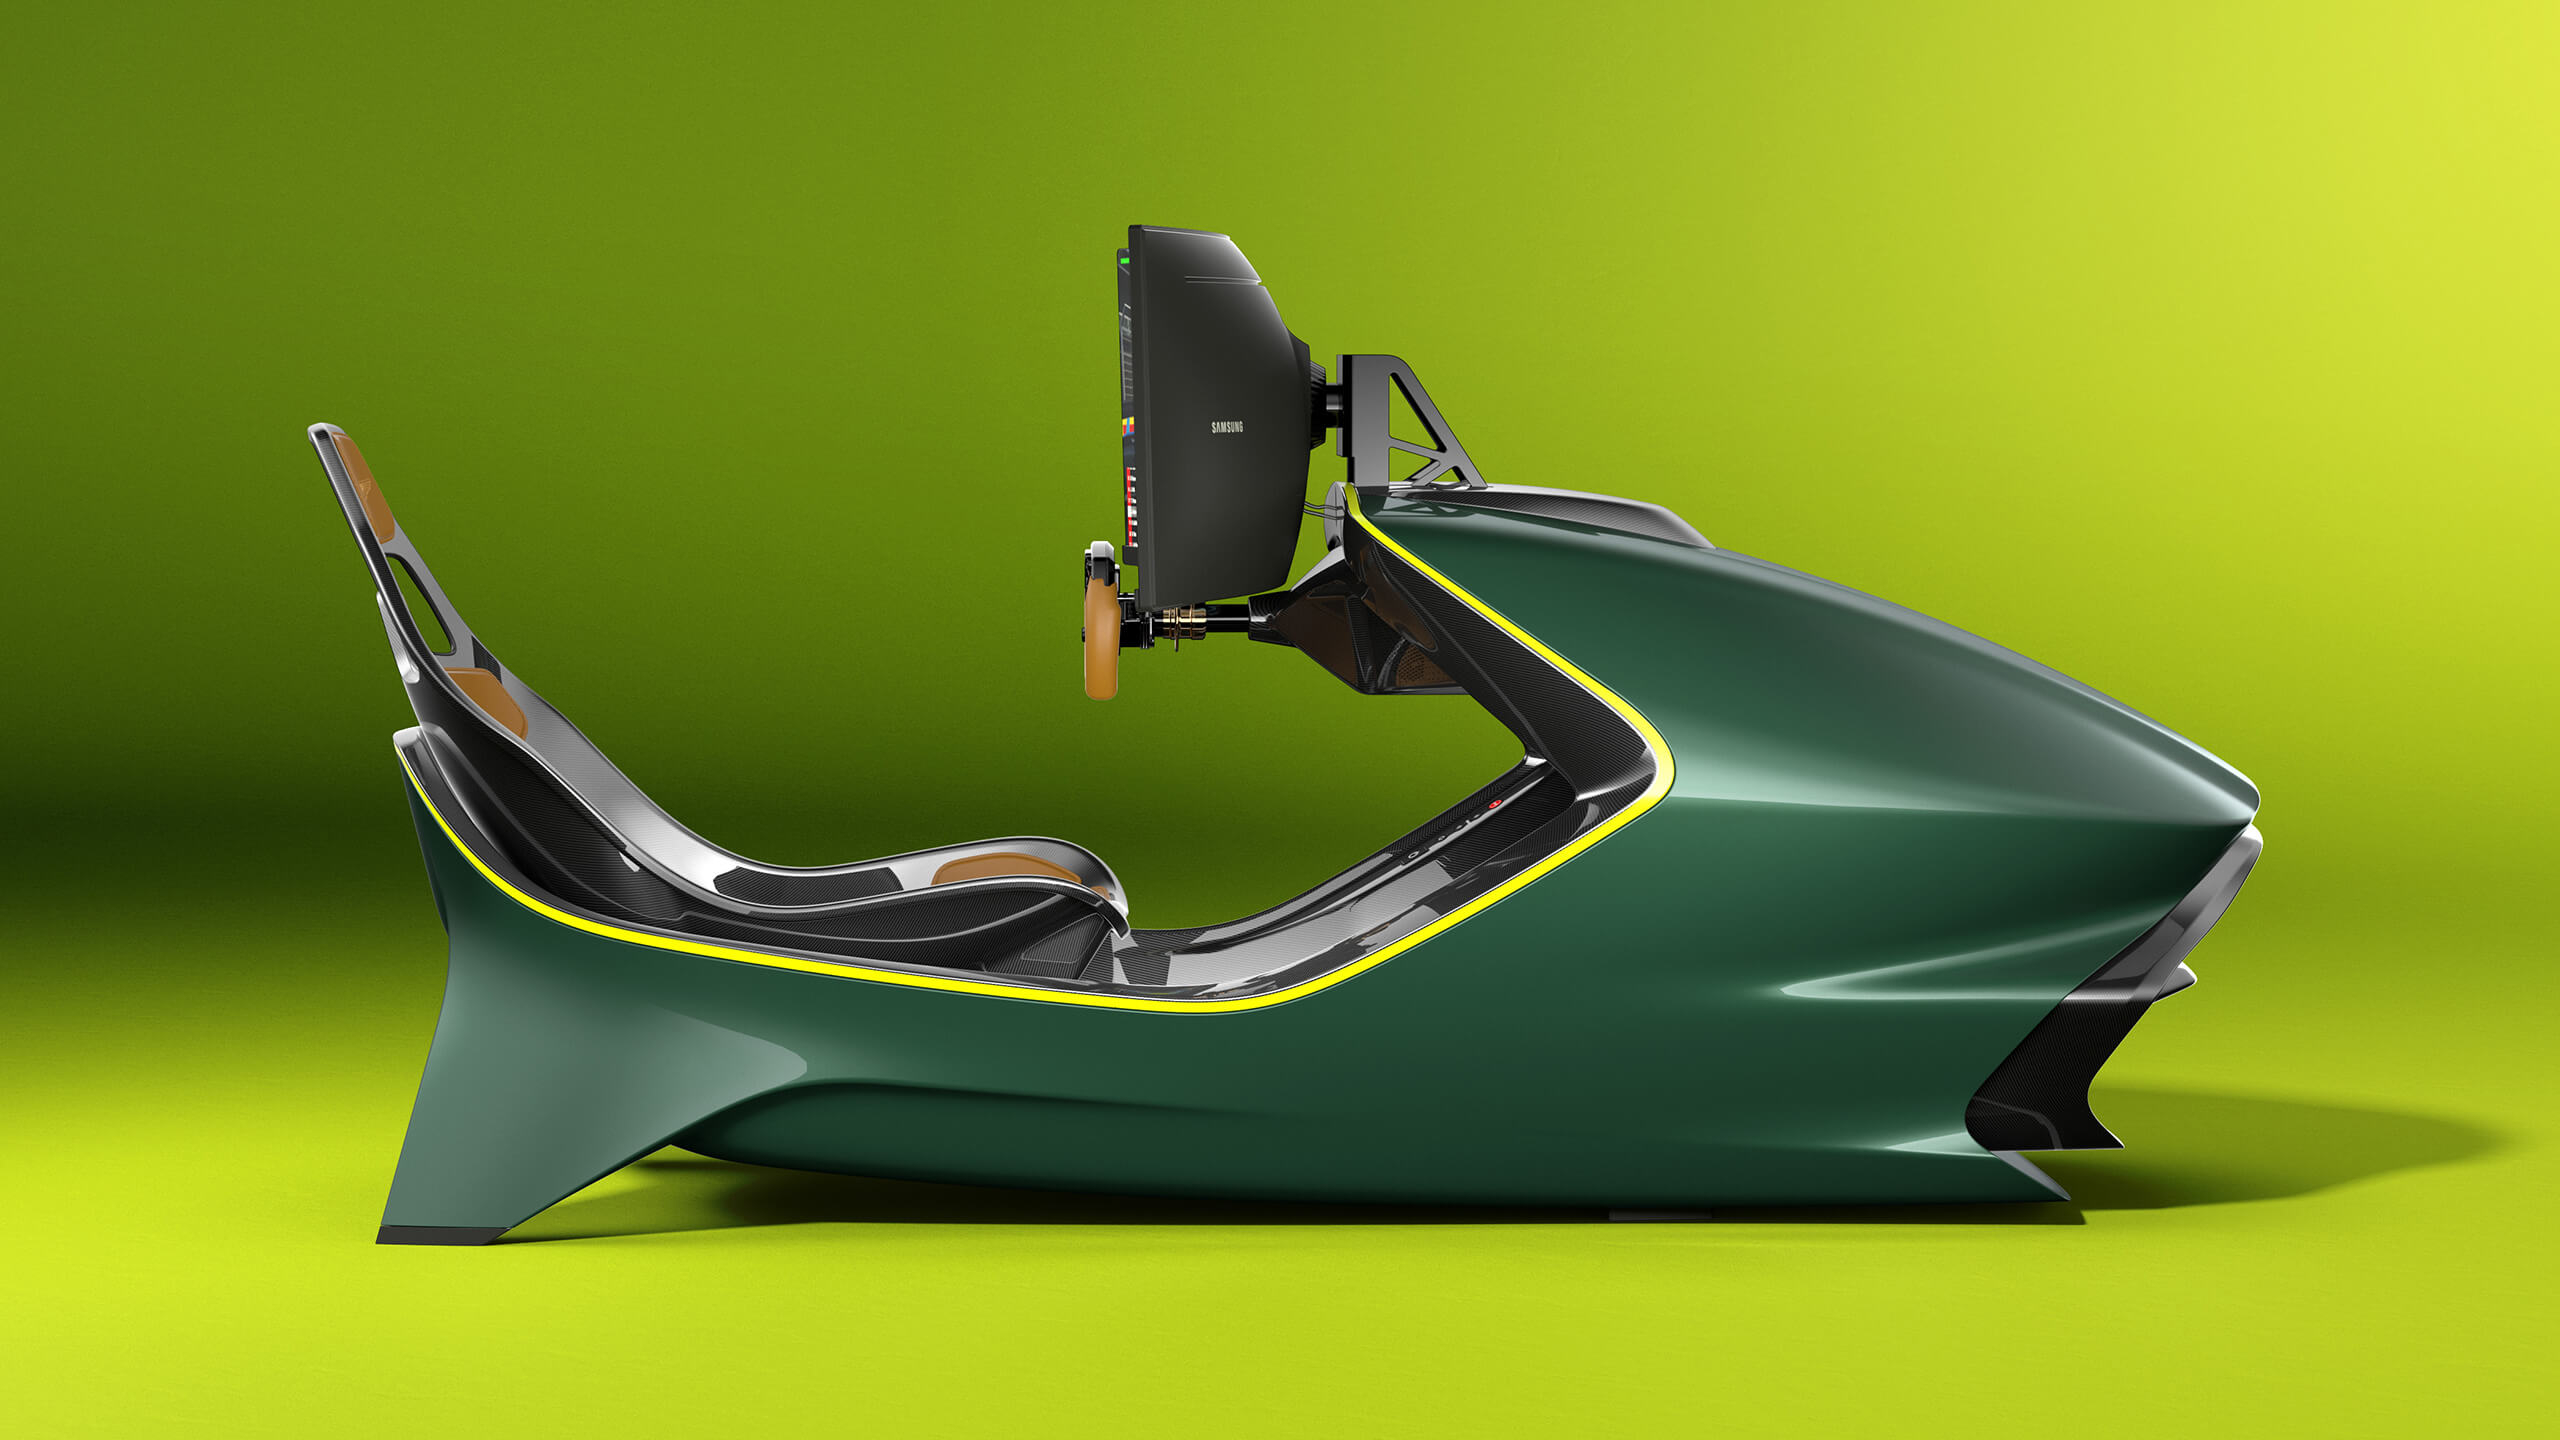 Working (at the wheel) from home: The Curv AMR-C01 simulator